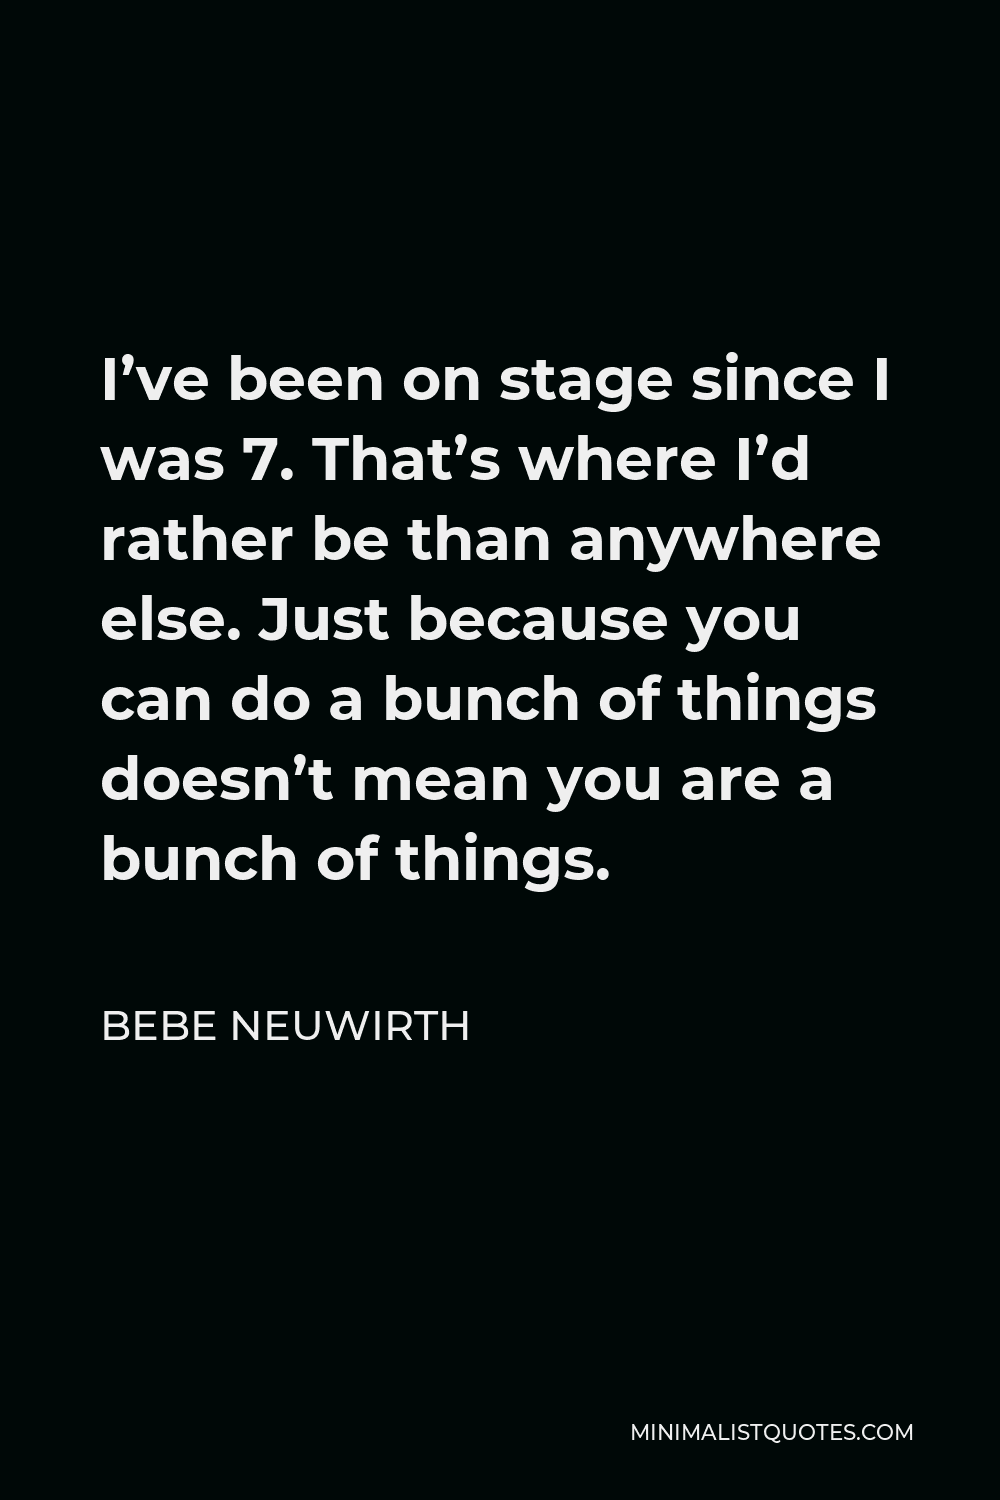 Bebe Neuwirth Quote - I’ve been on stage since I was 7. That’s where I’d rather be than anywhere else. Just because you can do a bunch of things doesn’t mean you are a bunch of things.